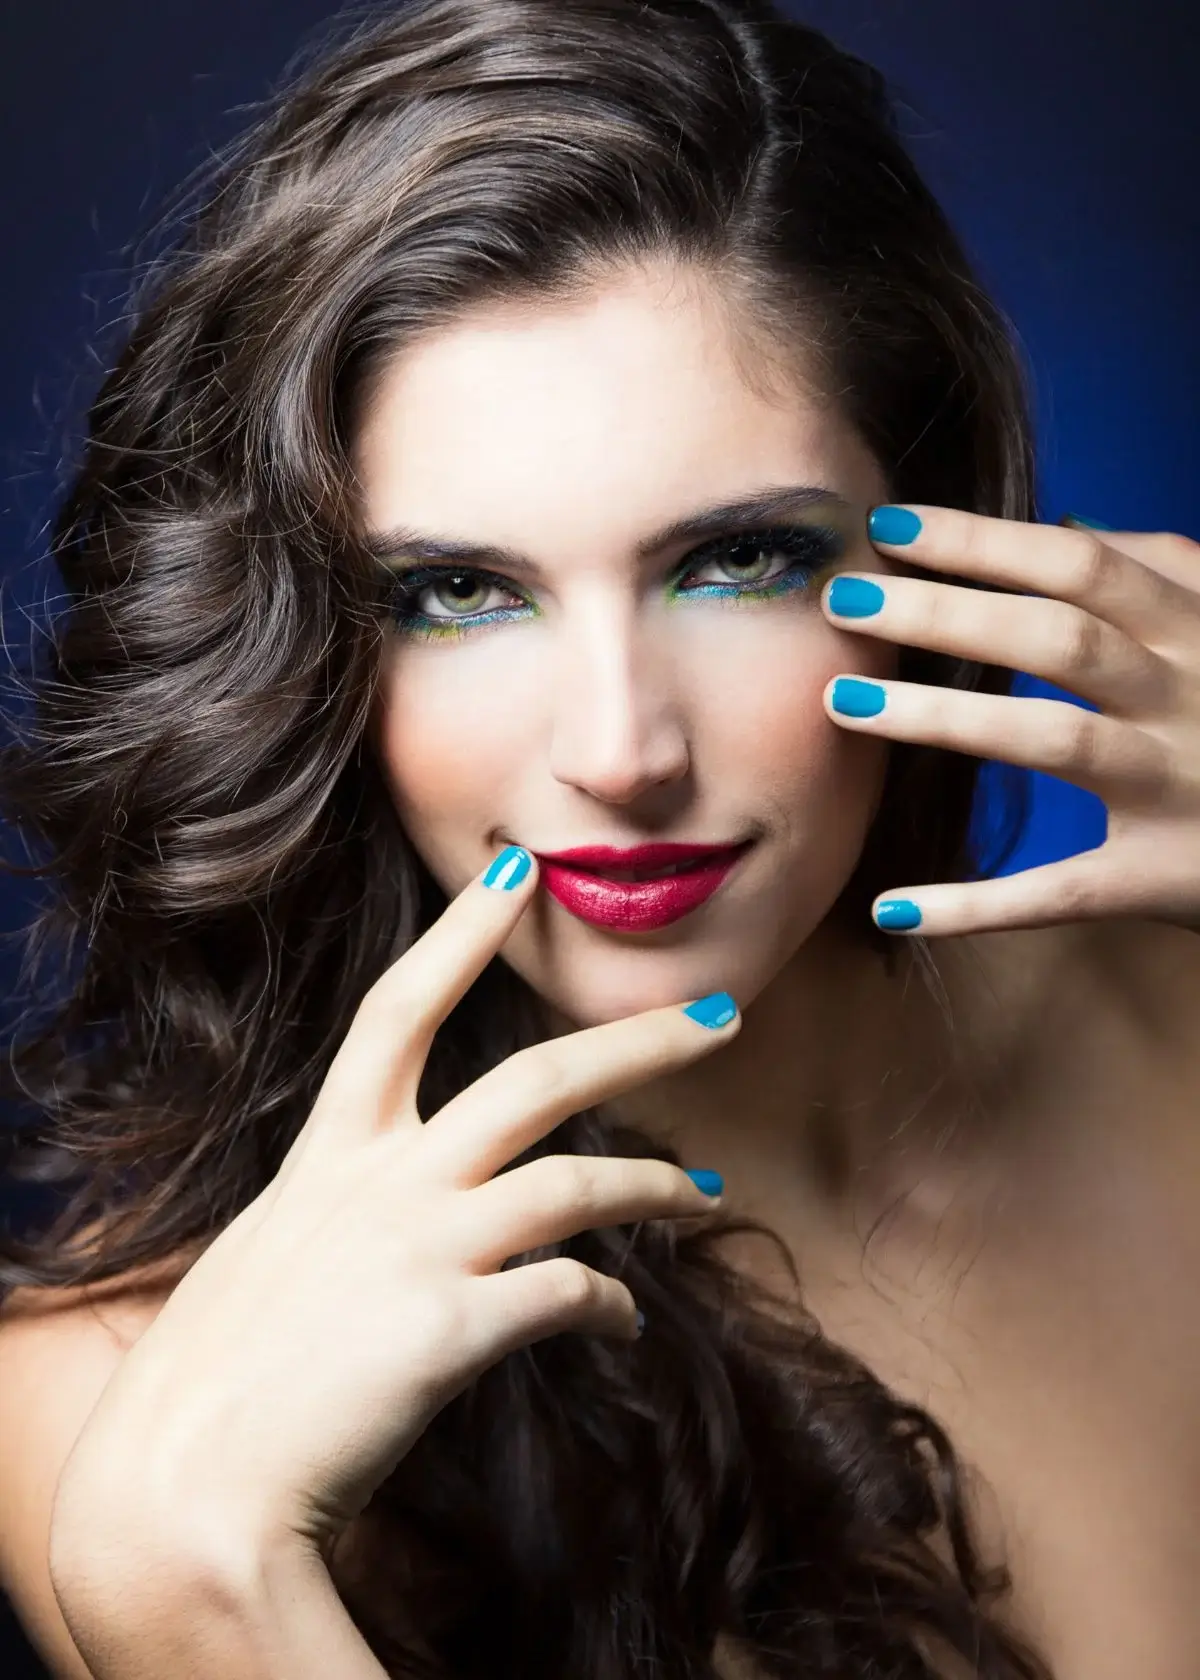 How to choose the right neon nail polish?